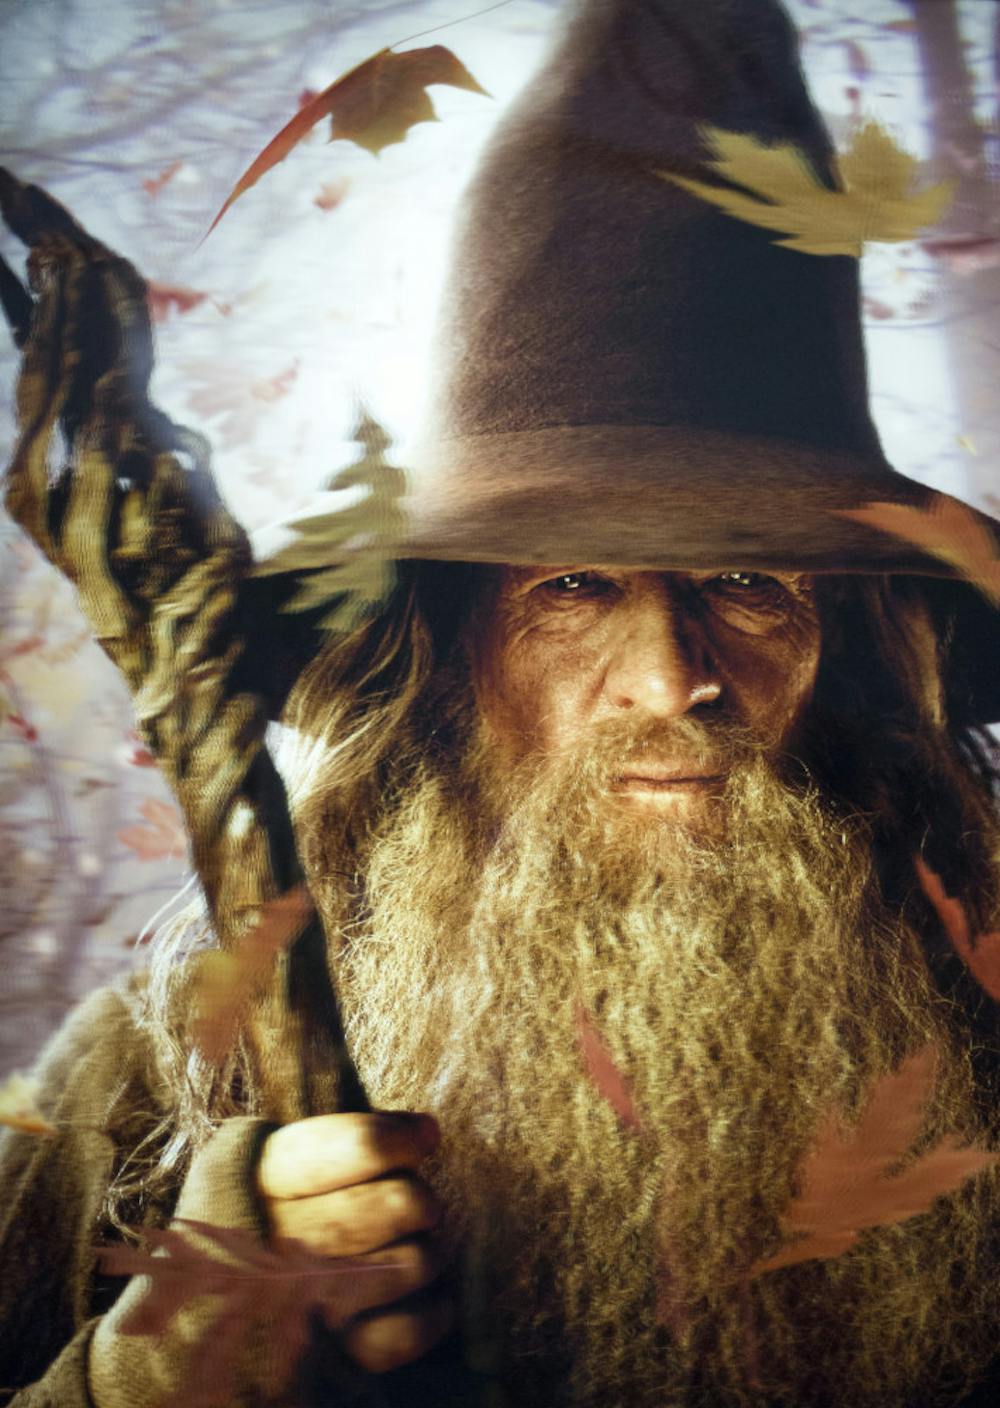 <p>"Gandalf" by Nathan Rupert, used under CC BY-NC-ND 2.0</p>